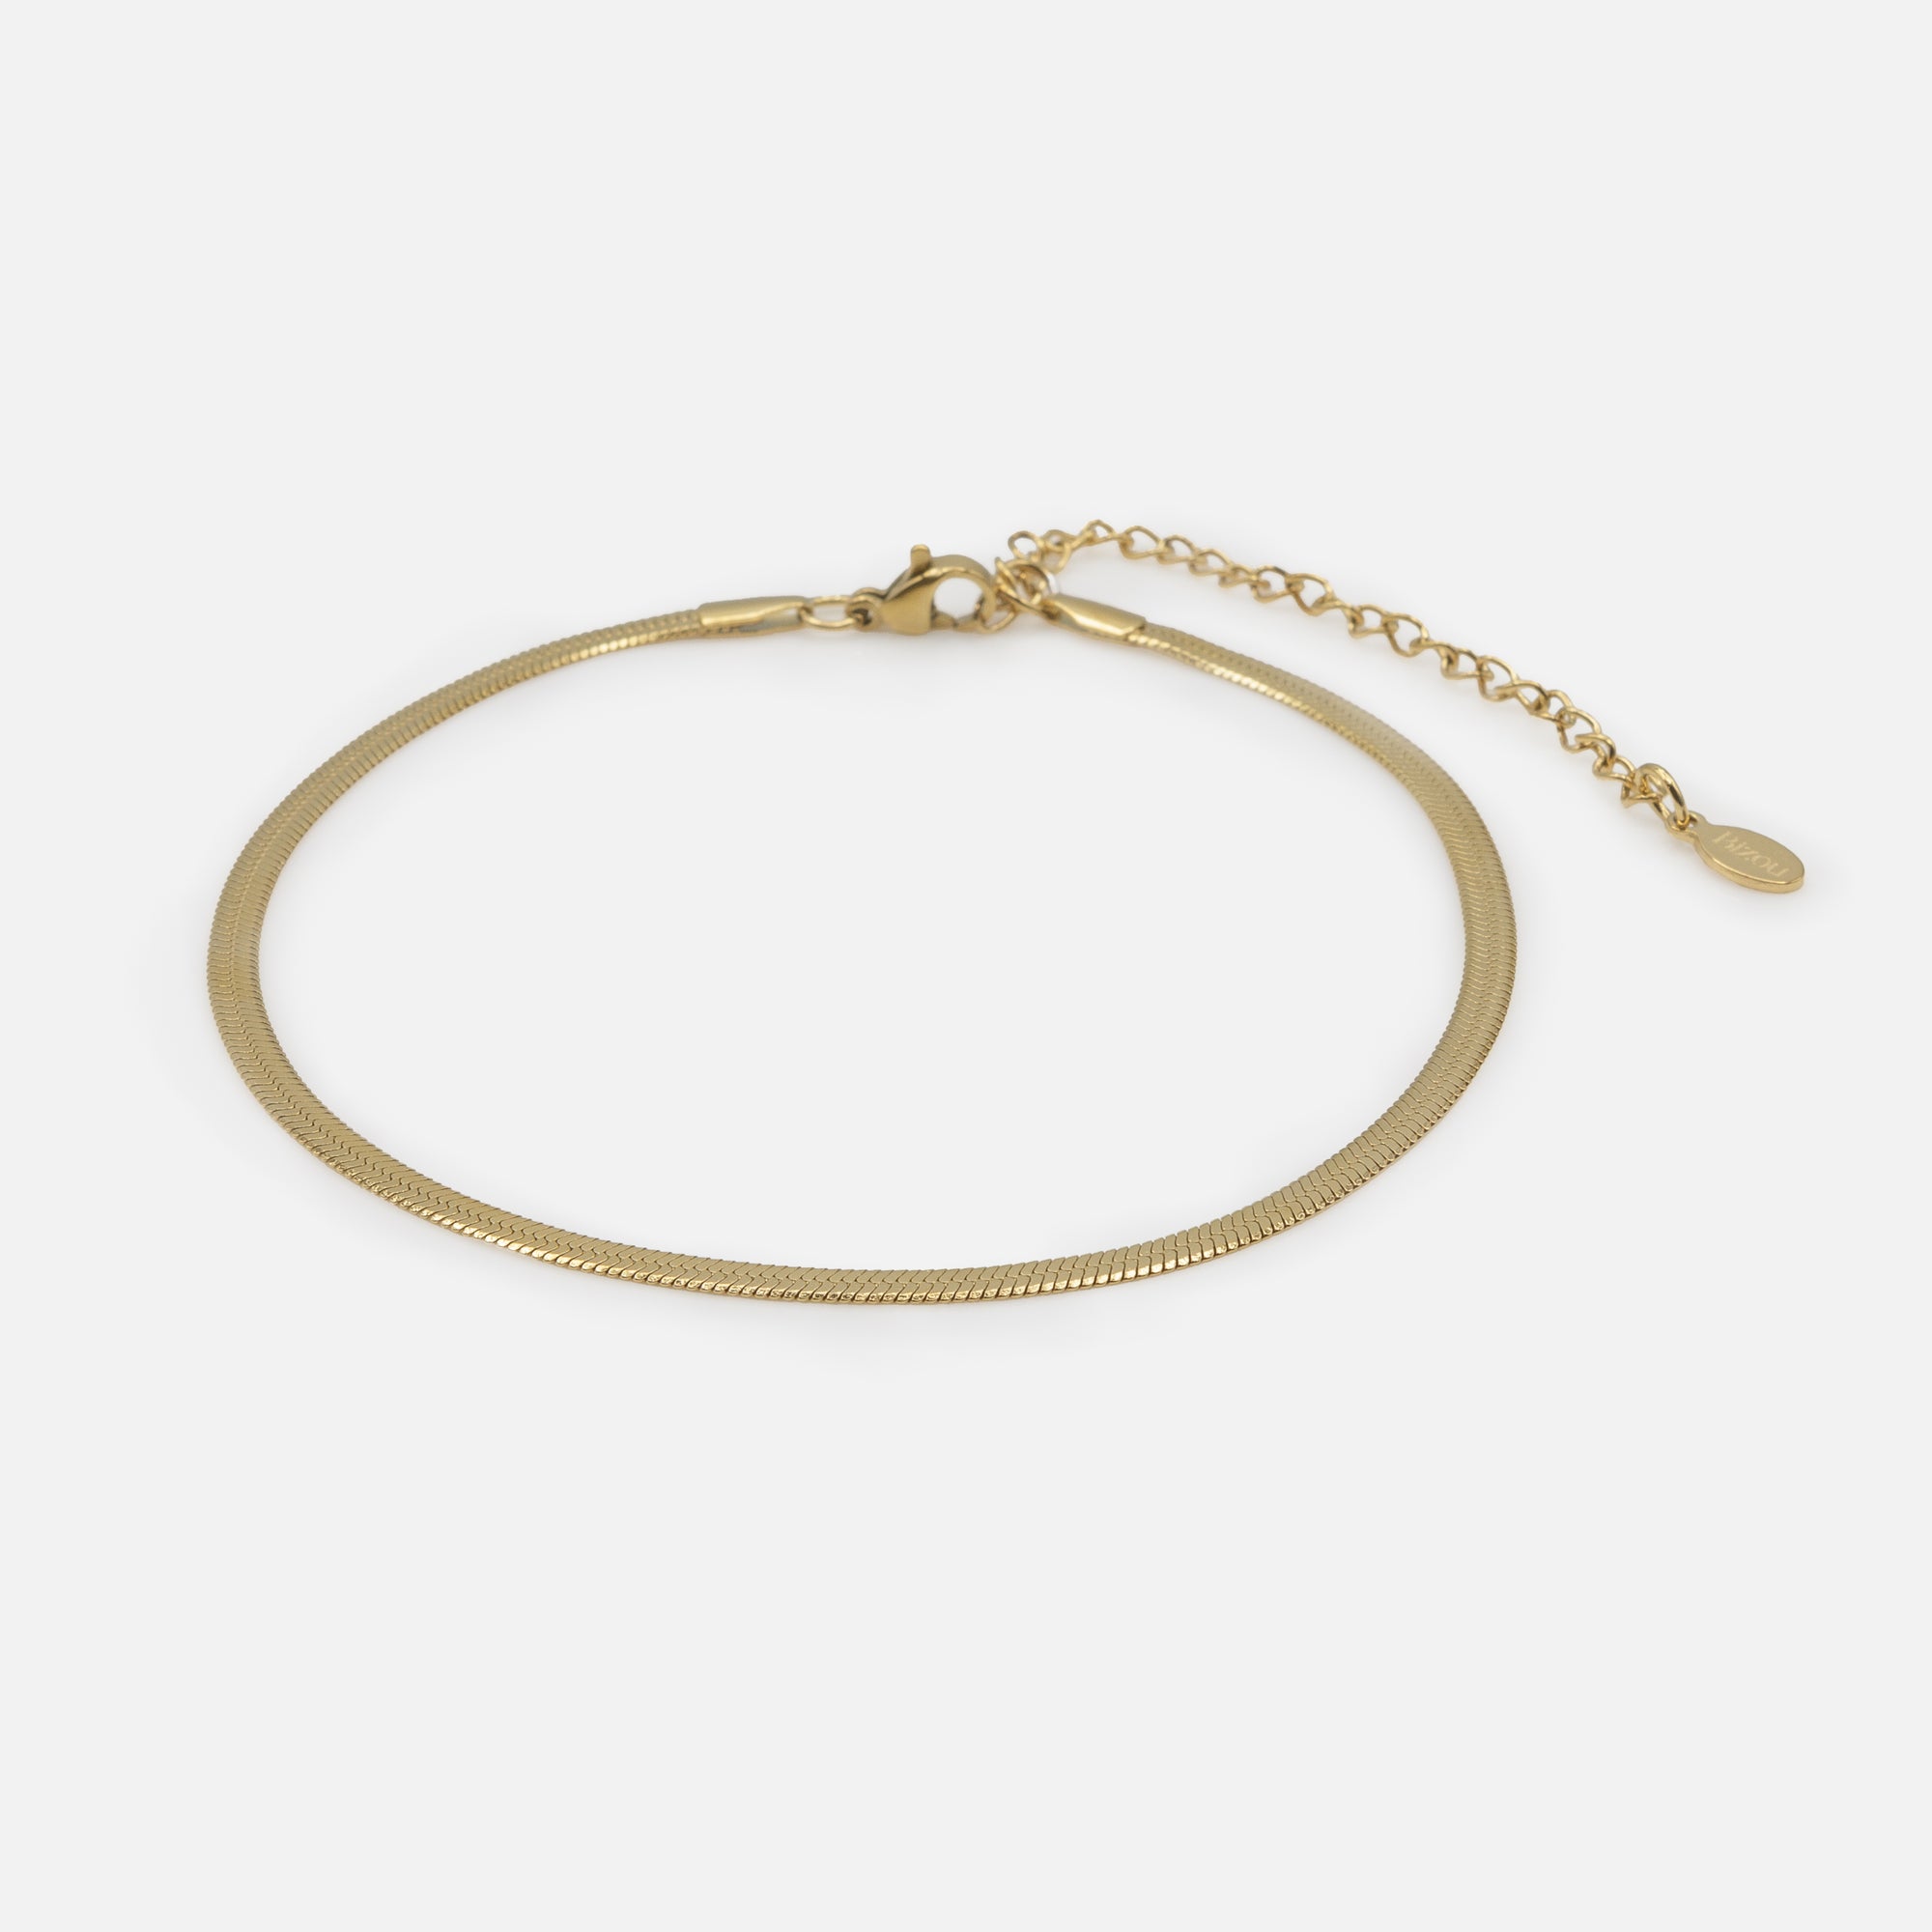 Gold flat serpentine link anklet in stainless steel